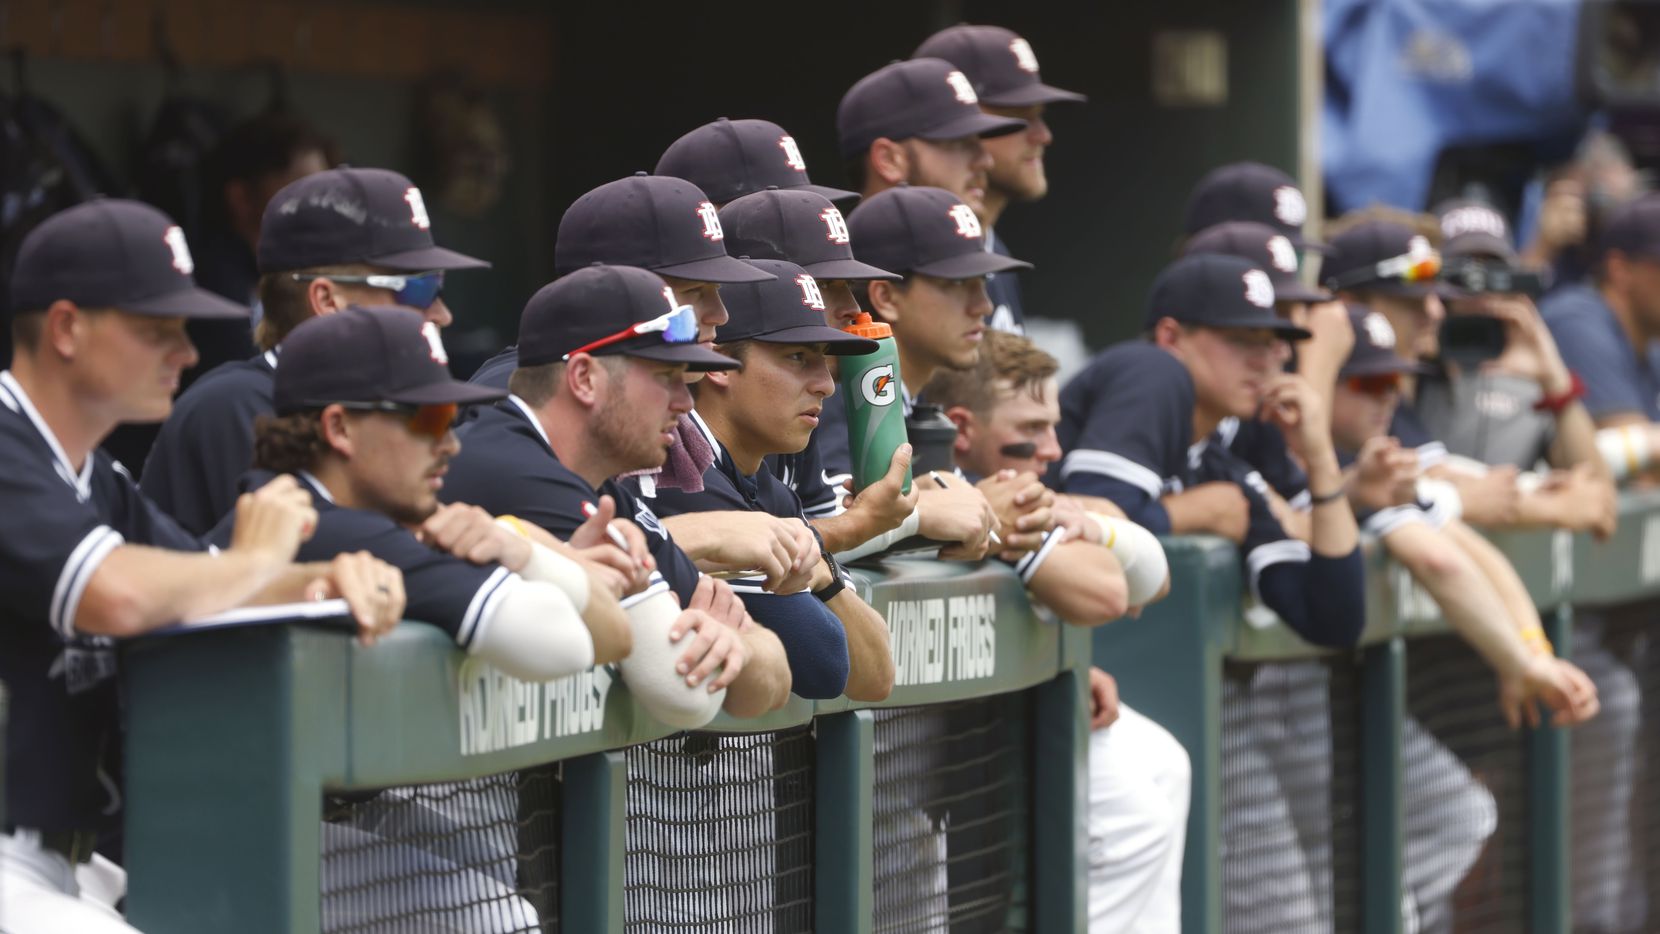 Dallas Baptist watches the action from the dugout against Oregon St. in the first inning during the NCAA Division I Baseball Regional Championship game in Fort Worth, Texas on June 7, 2021.